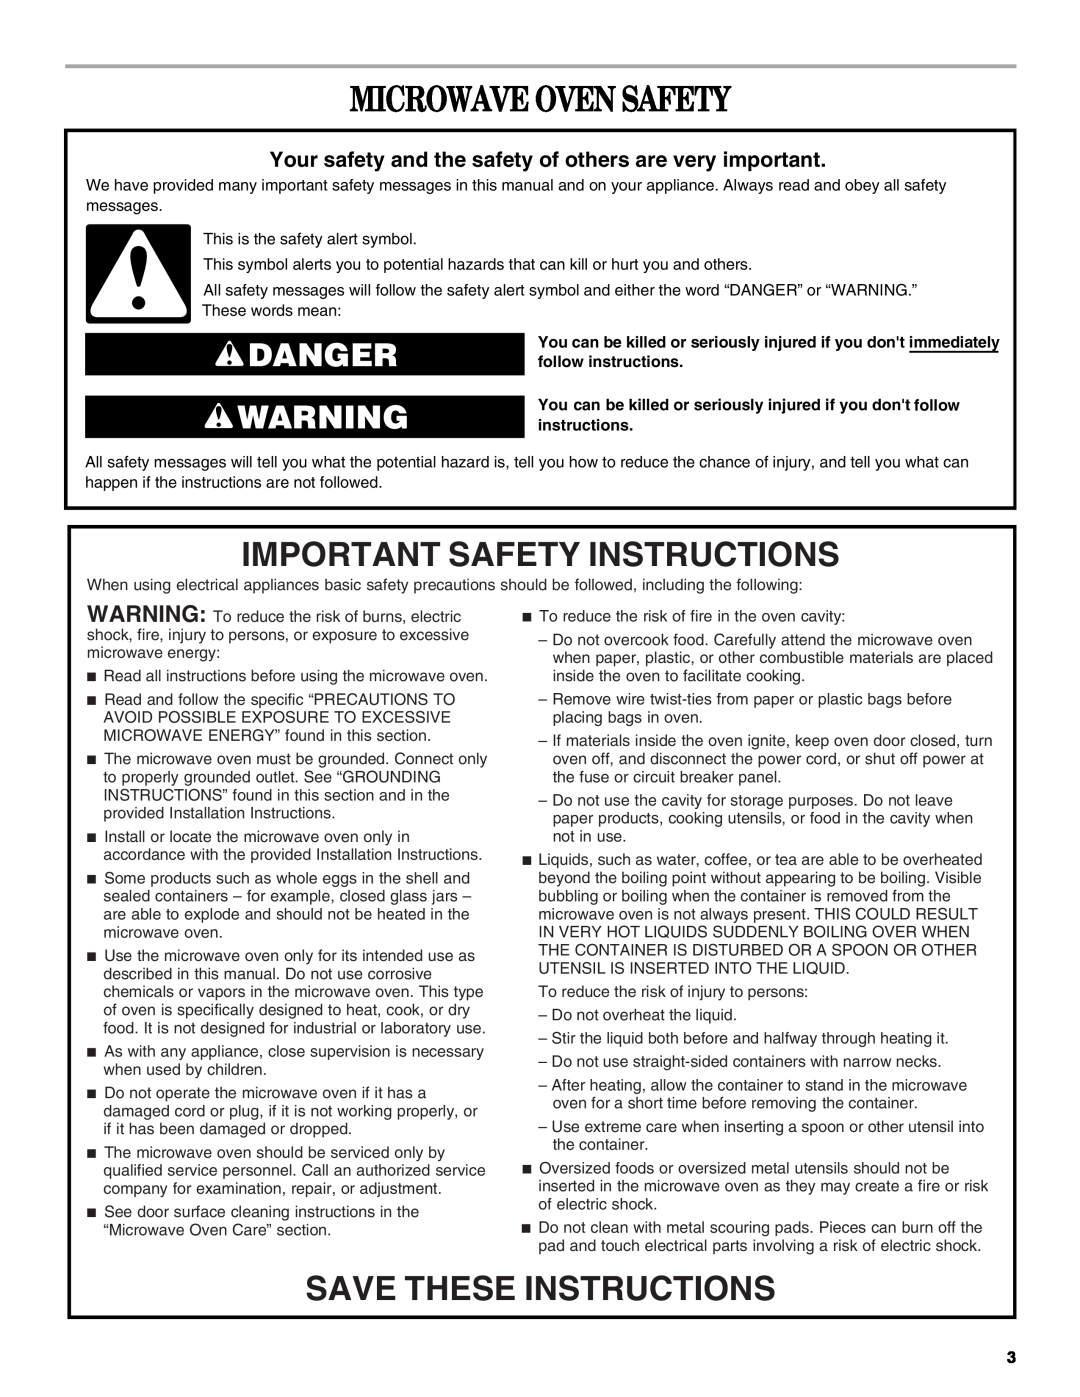 Whirlpool W10217293A, W10188233A Microwave Oven Safety, Important Safety Instructions, Save These Instructions, Danger 